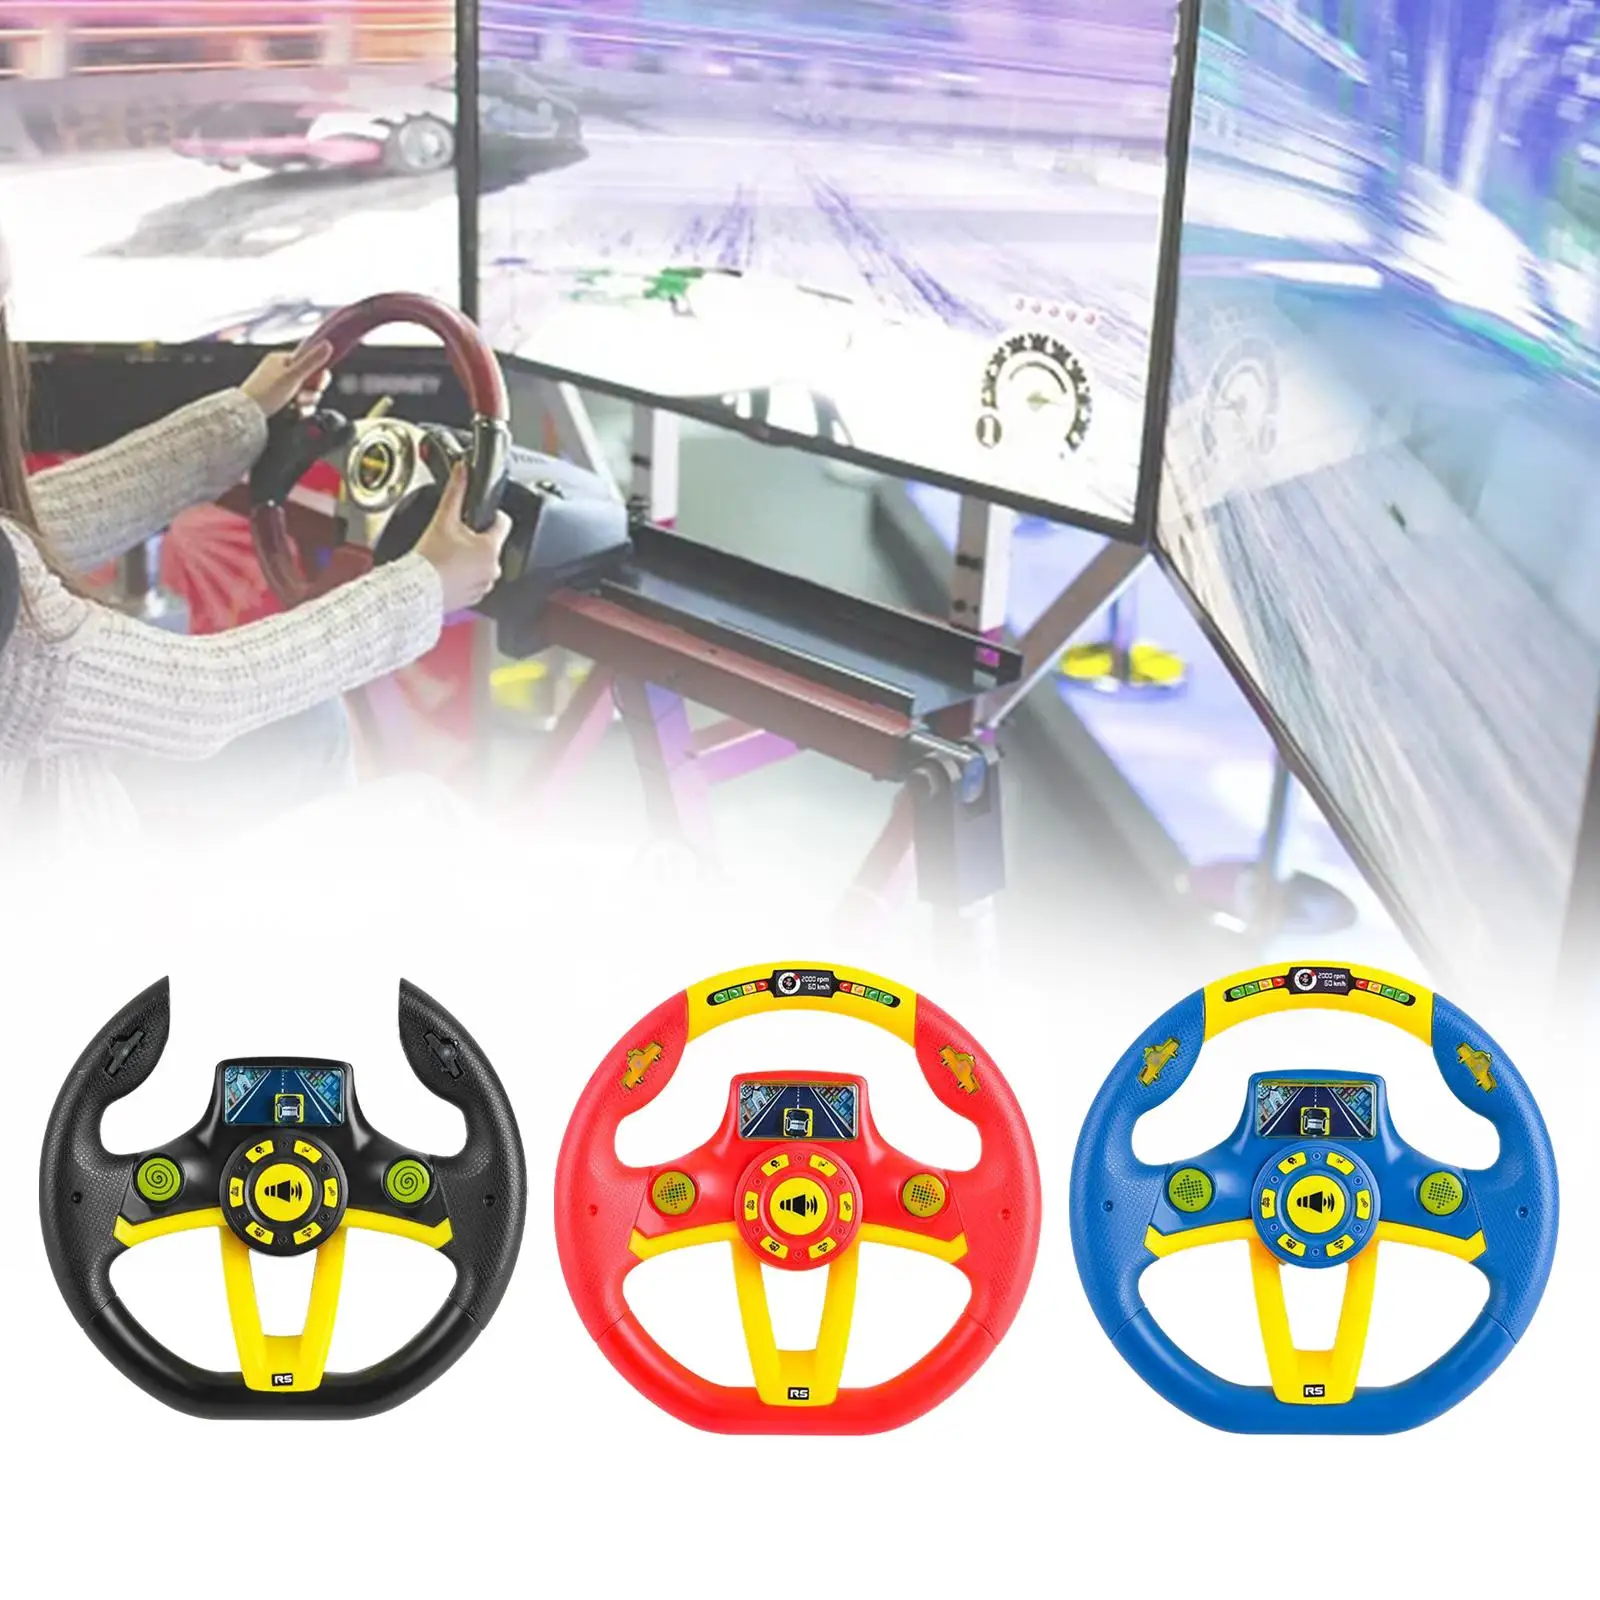 Simulated Steering Wheel Educational Learning Toy Pretend Play Driving Toy for